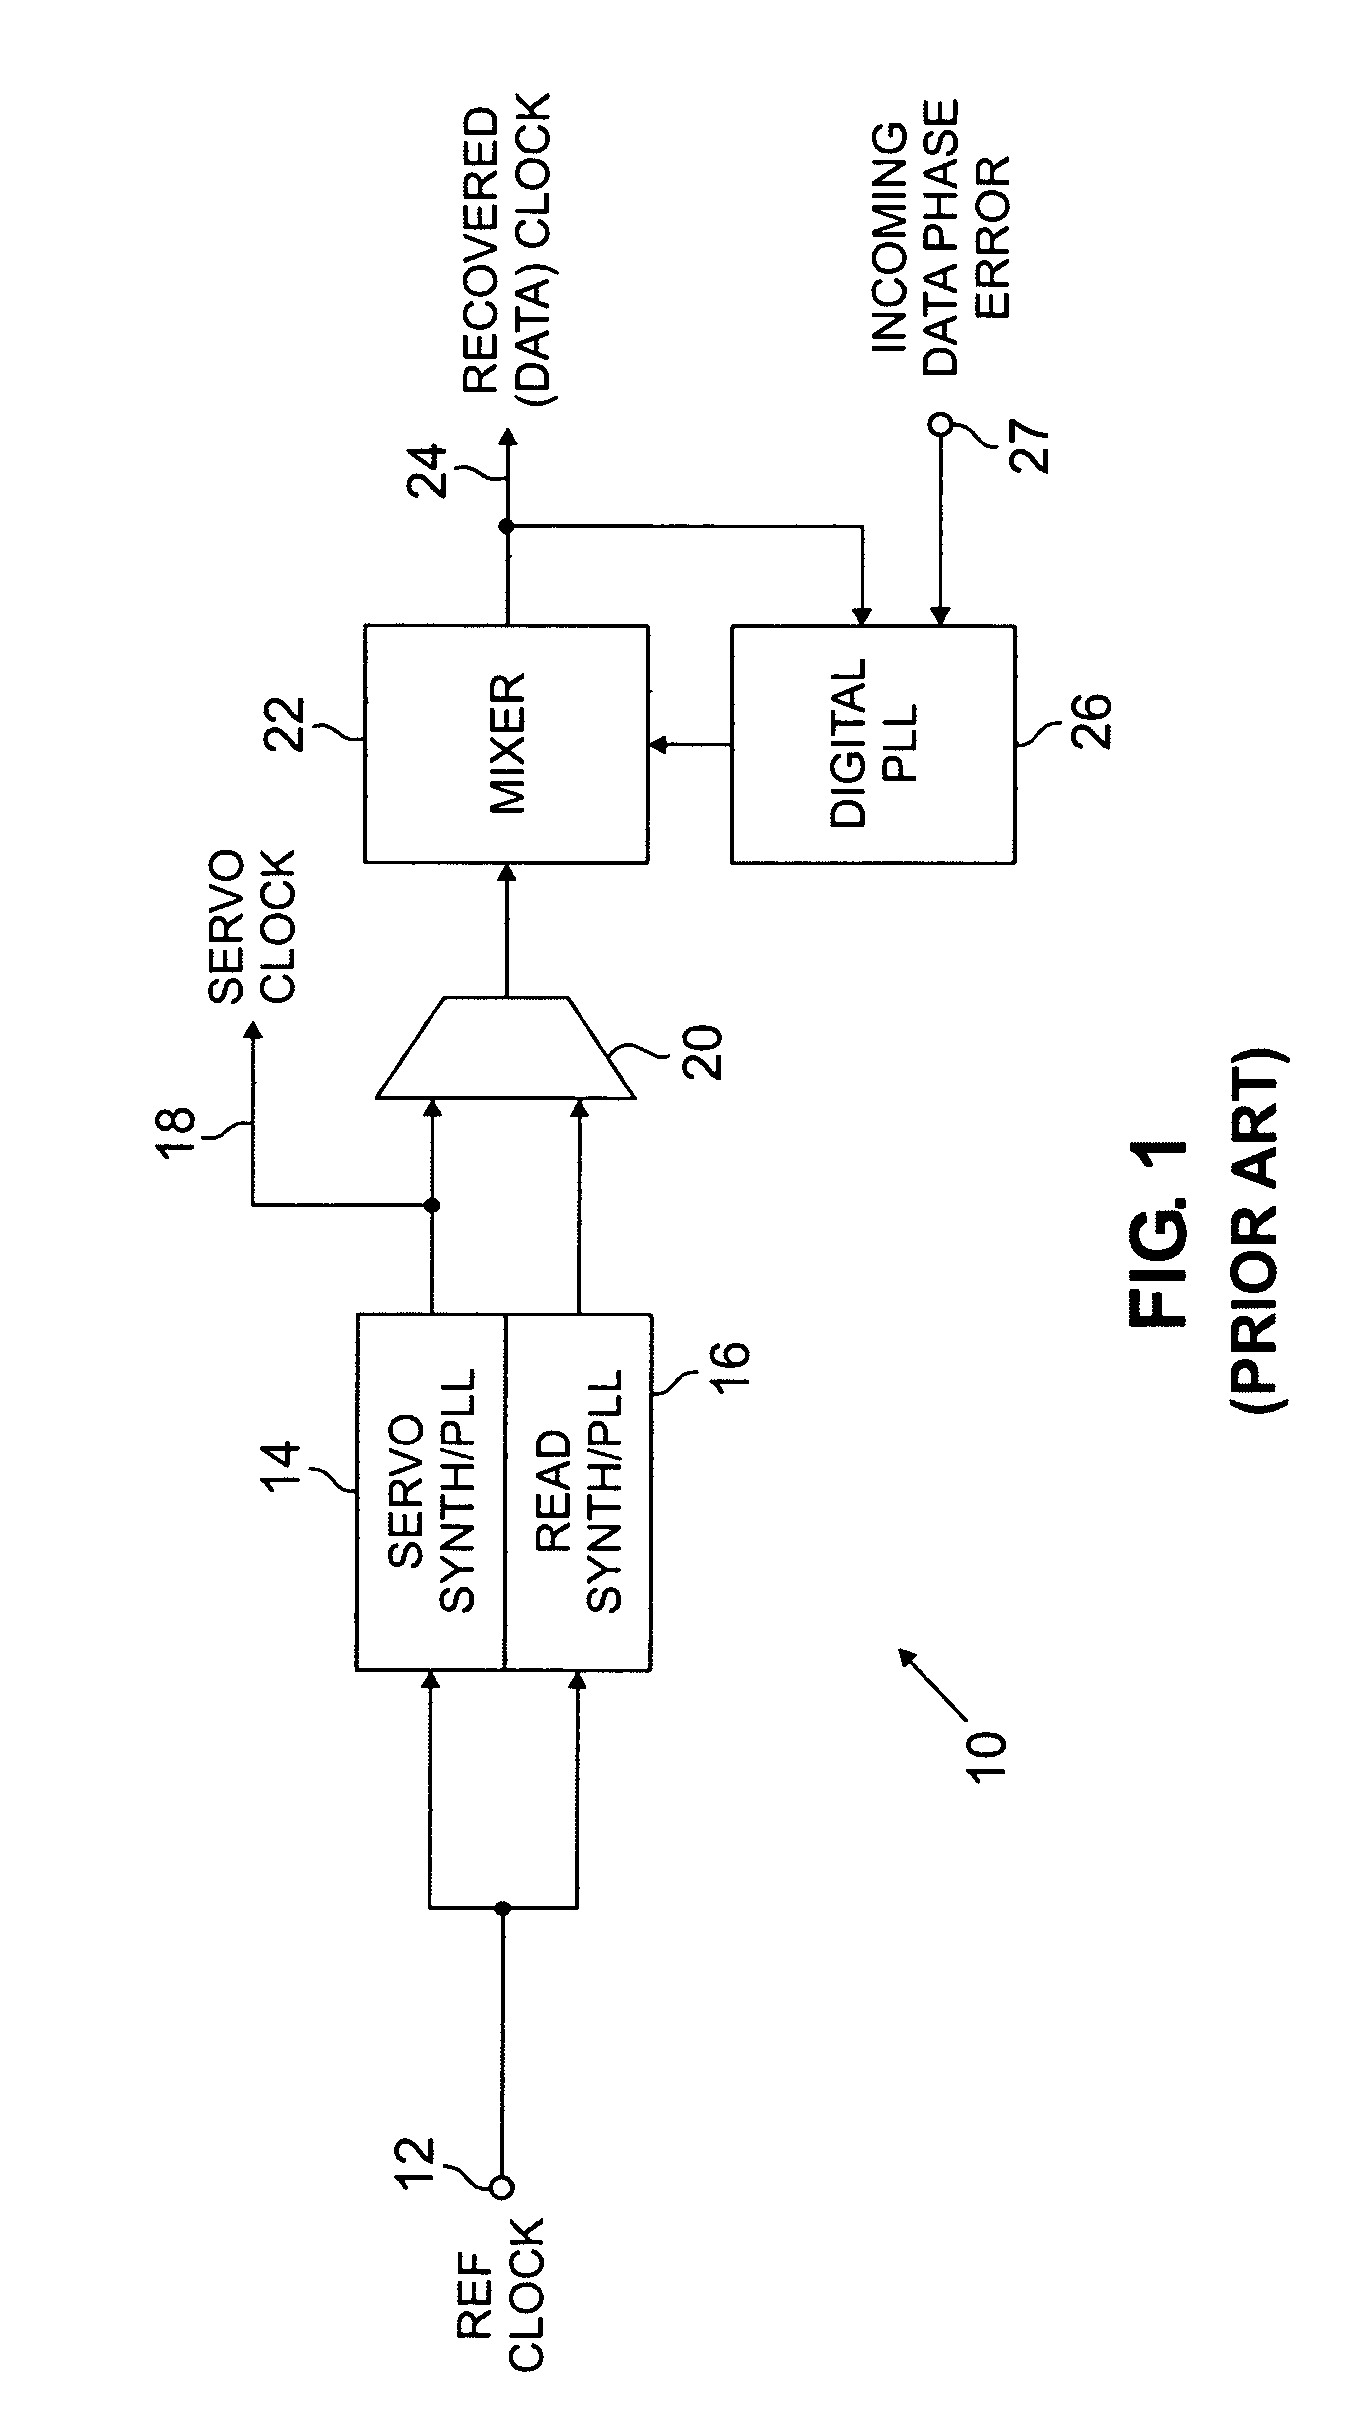 System for locking a clock onto the frequency of data recorded on a storage medium